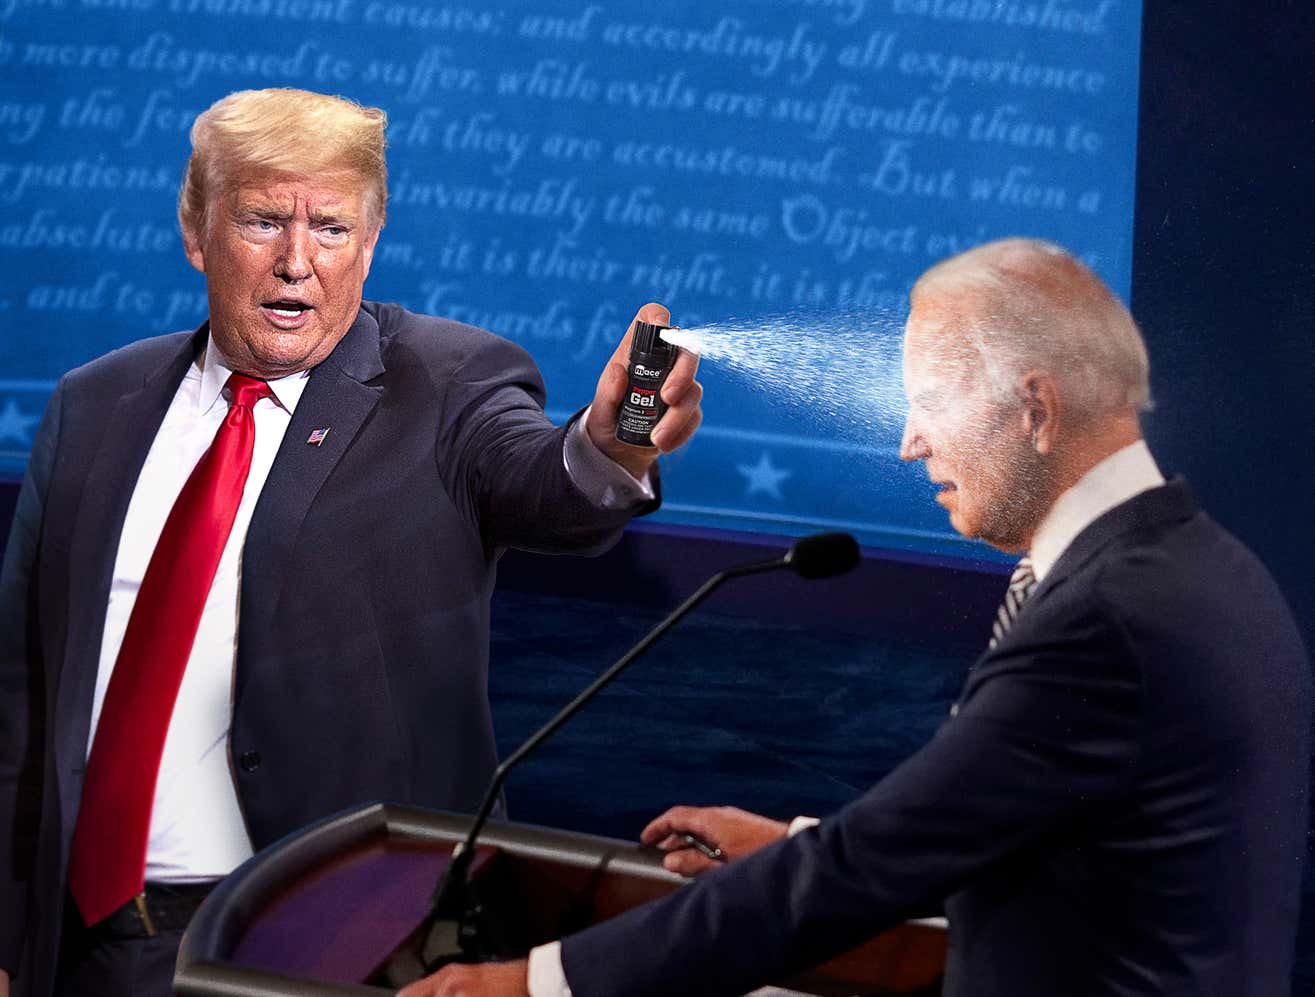 After Biden declared "We finally beat medicare." Trump looked visibly upset, looked straight at the president and unloaded a generous amount of Hex Bear spray direectly into Biden's confused straining smug face saying "I hope you and all your radical centrist Democrats FEEL THE BURN Joe."